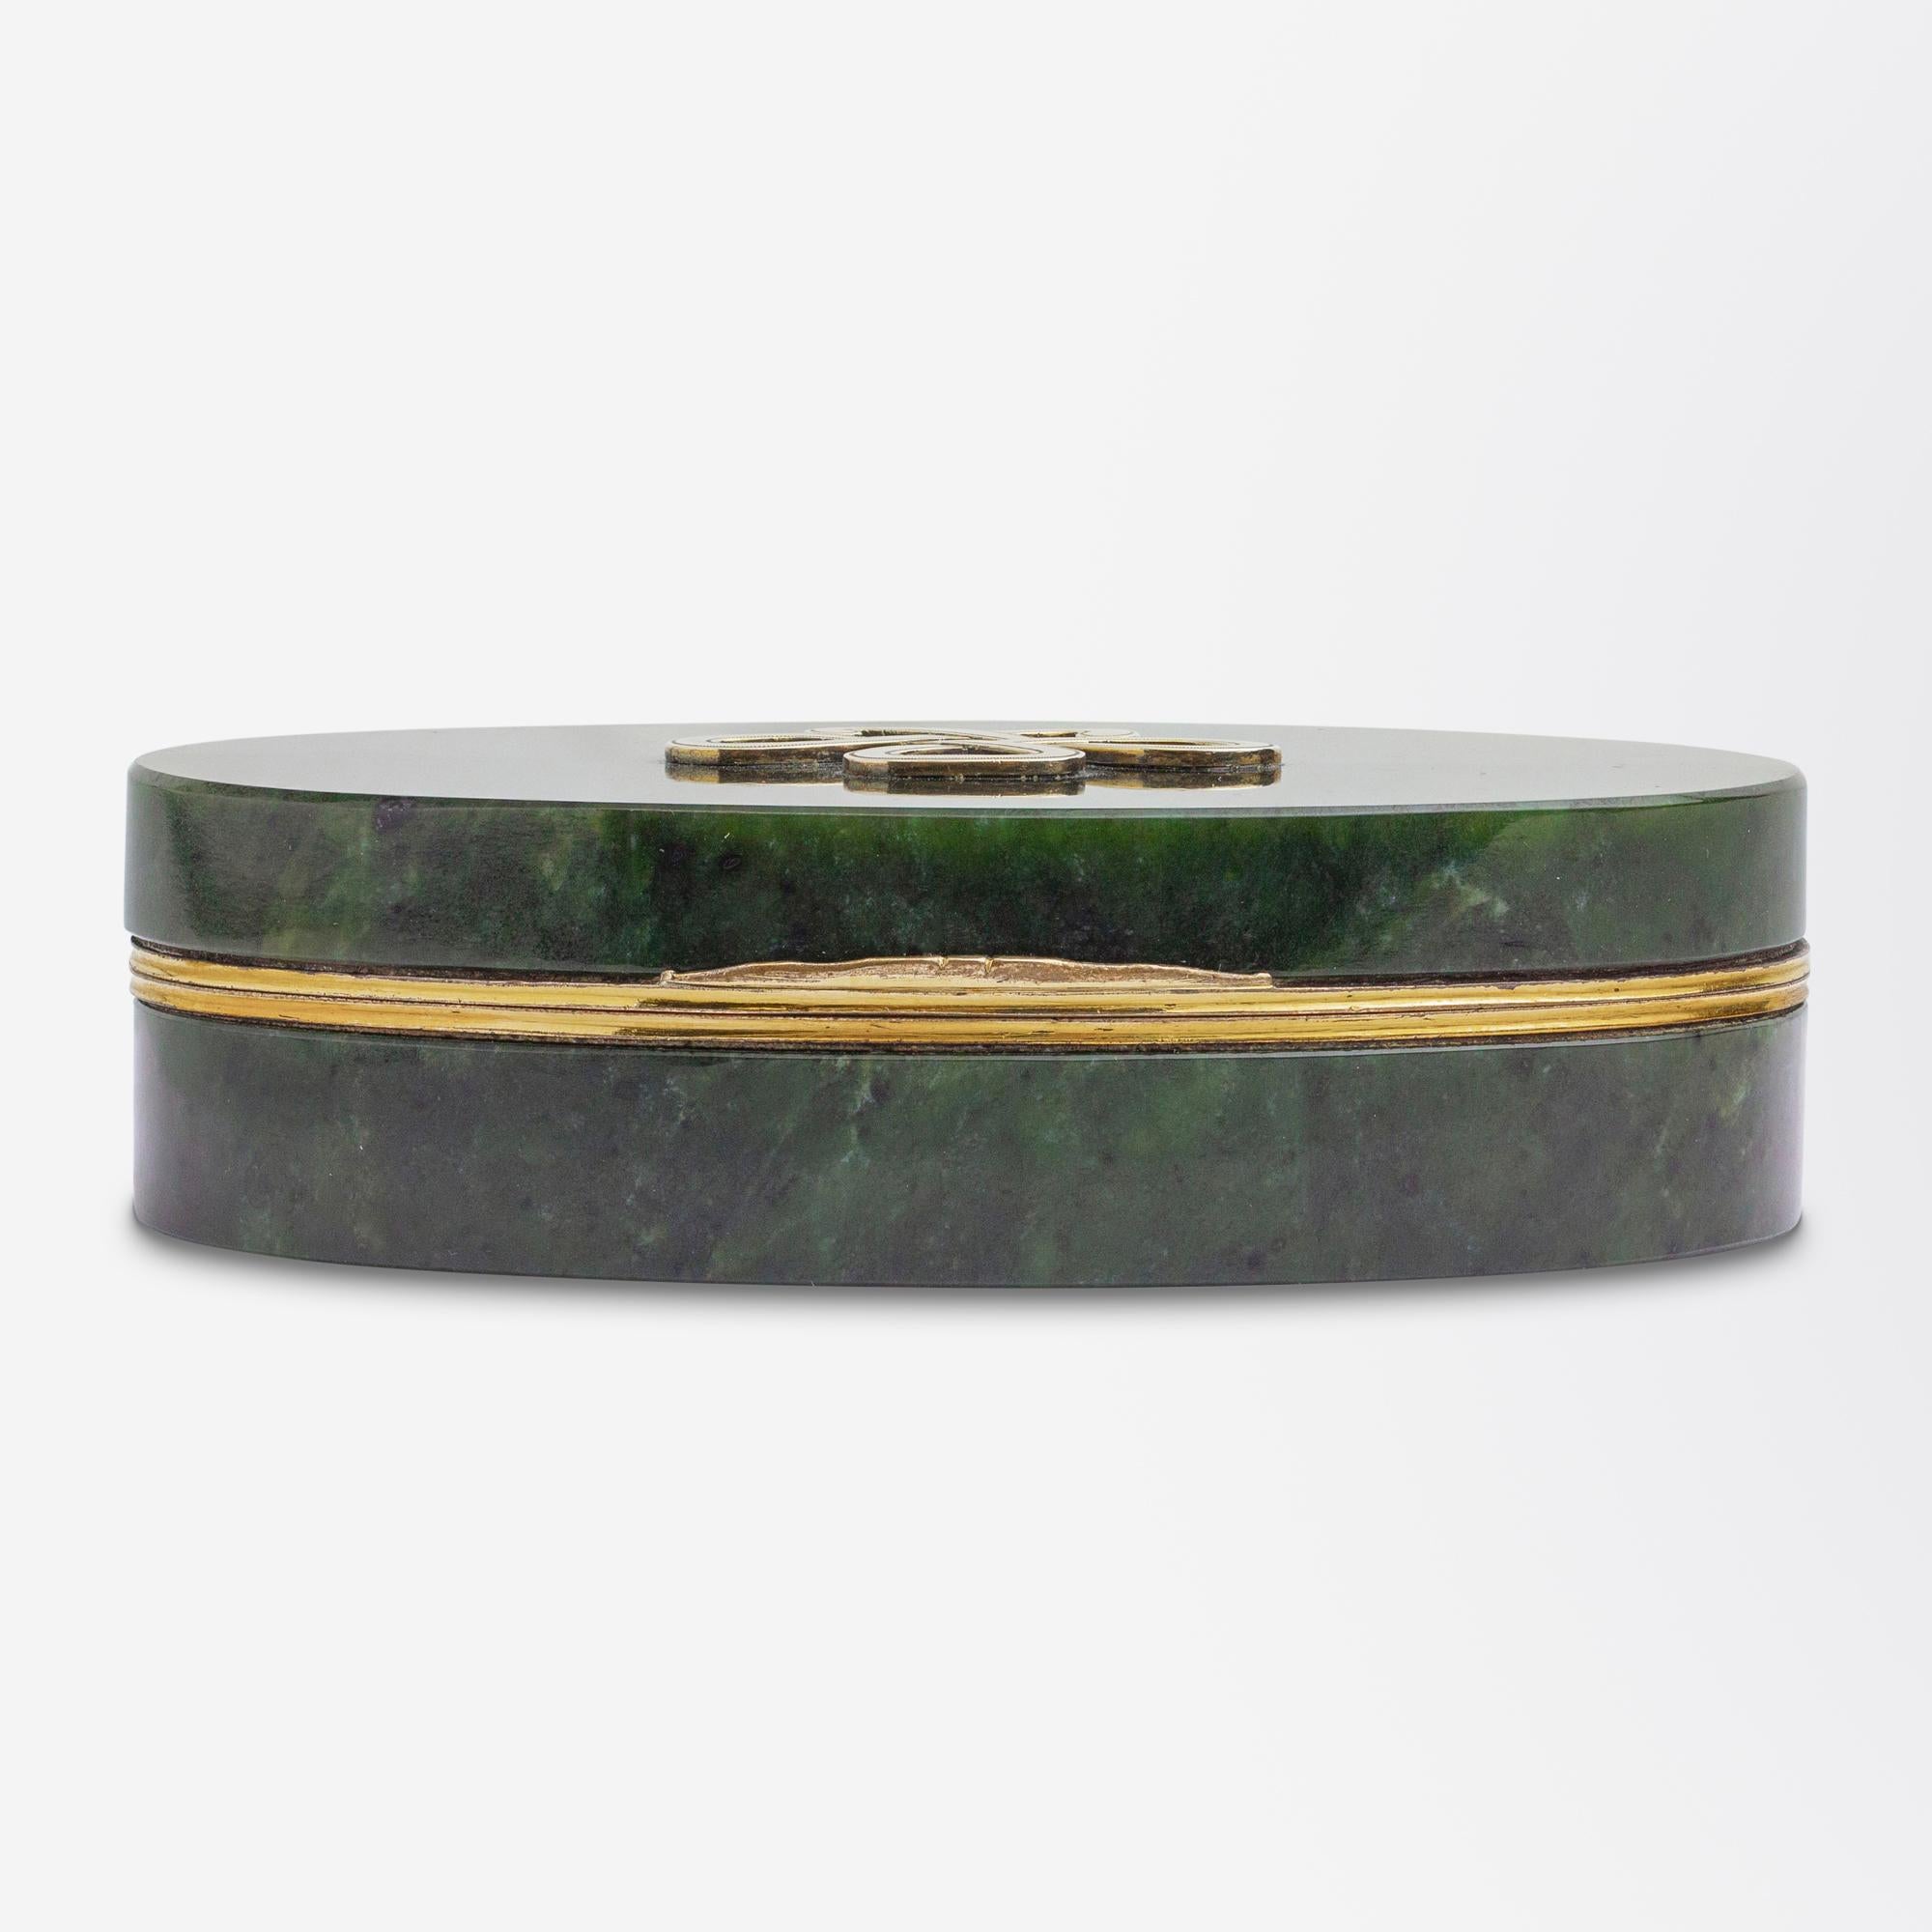 Uncut Spinach Jade & Gilt Metal Box, Likely Russian